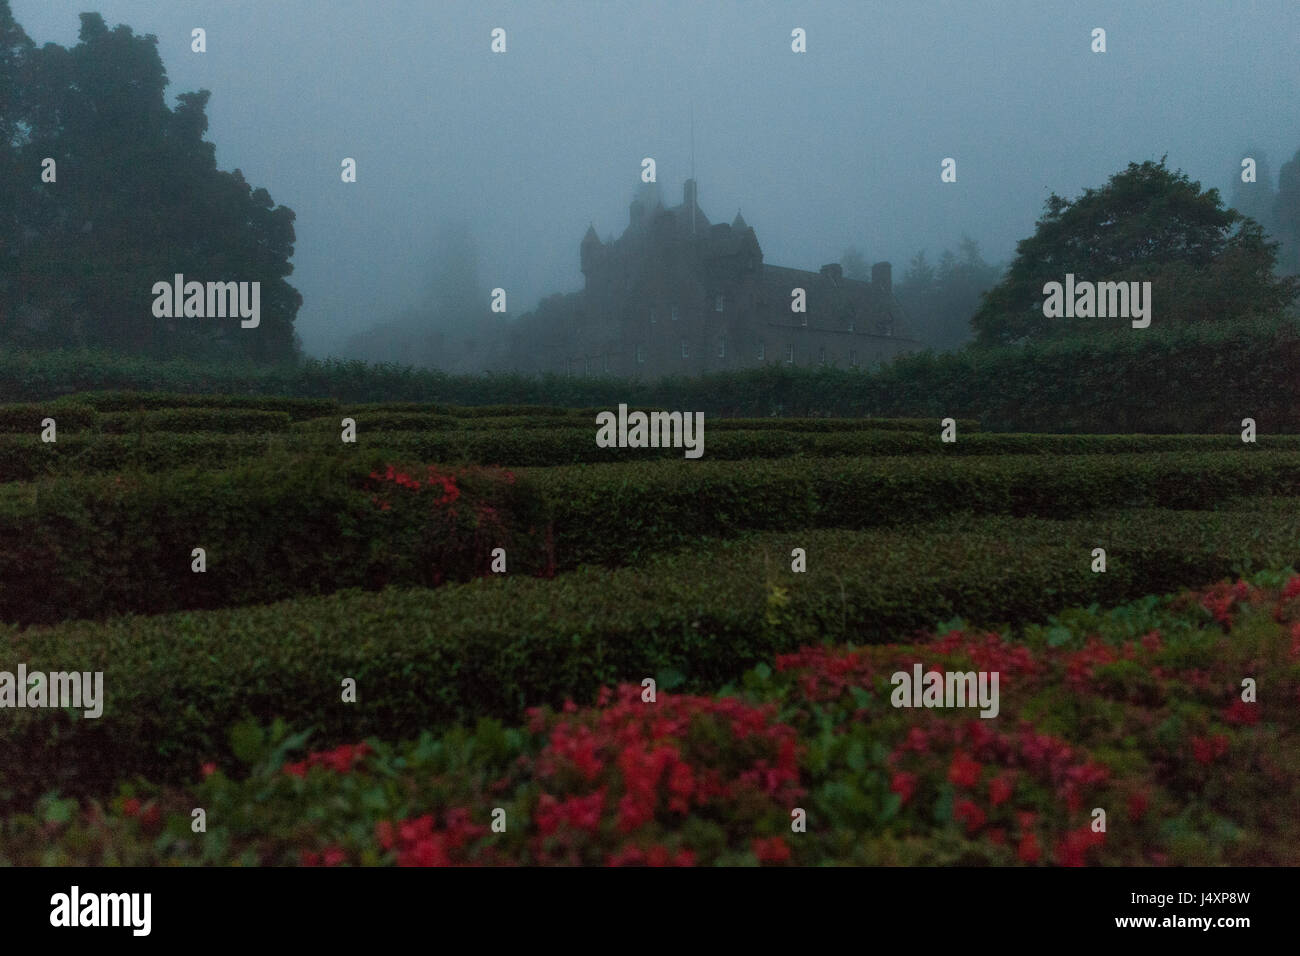 A view of Cawdor Castle in the early morning mist, Nairnshire, Scotland. Derek Hudson / Alamy Stock Photo Stock Photo